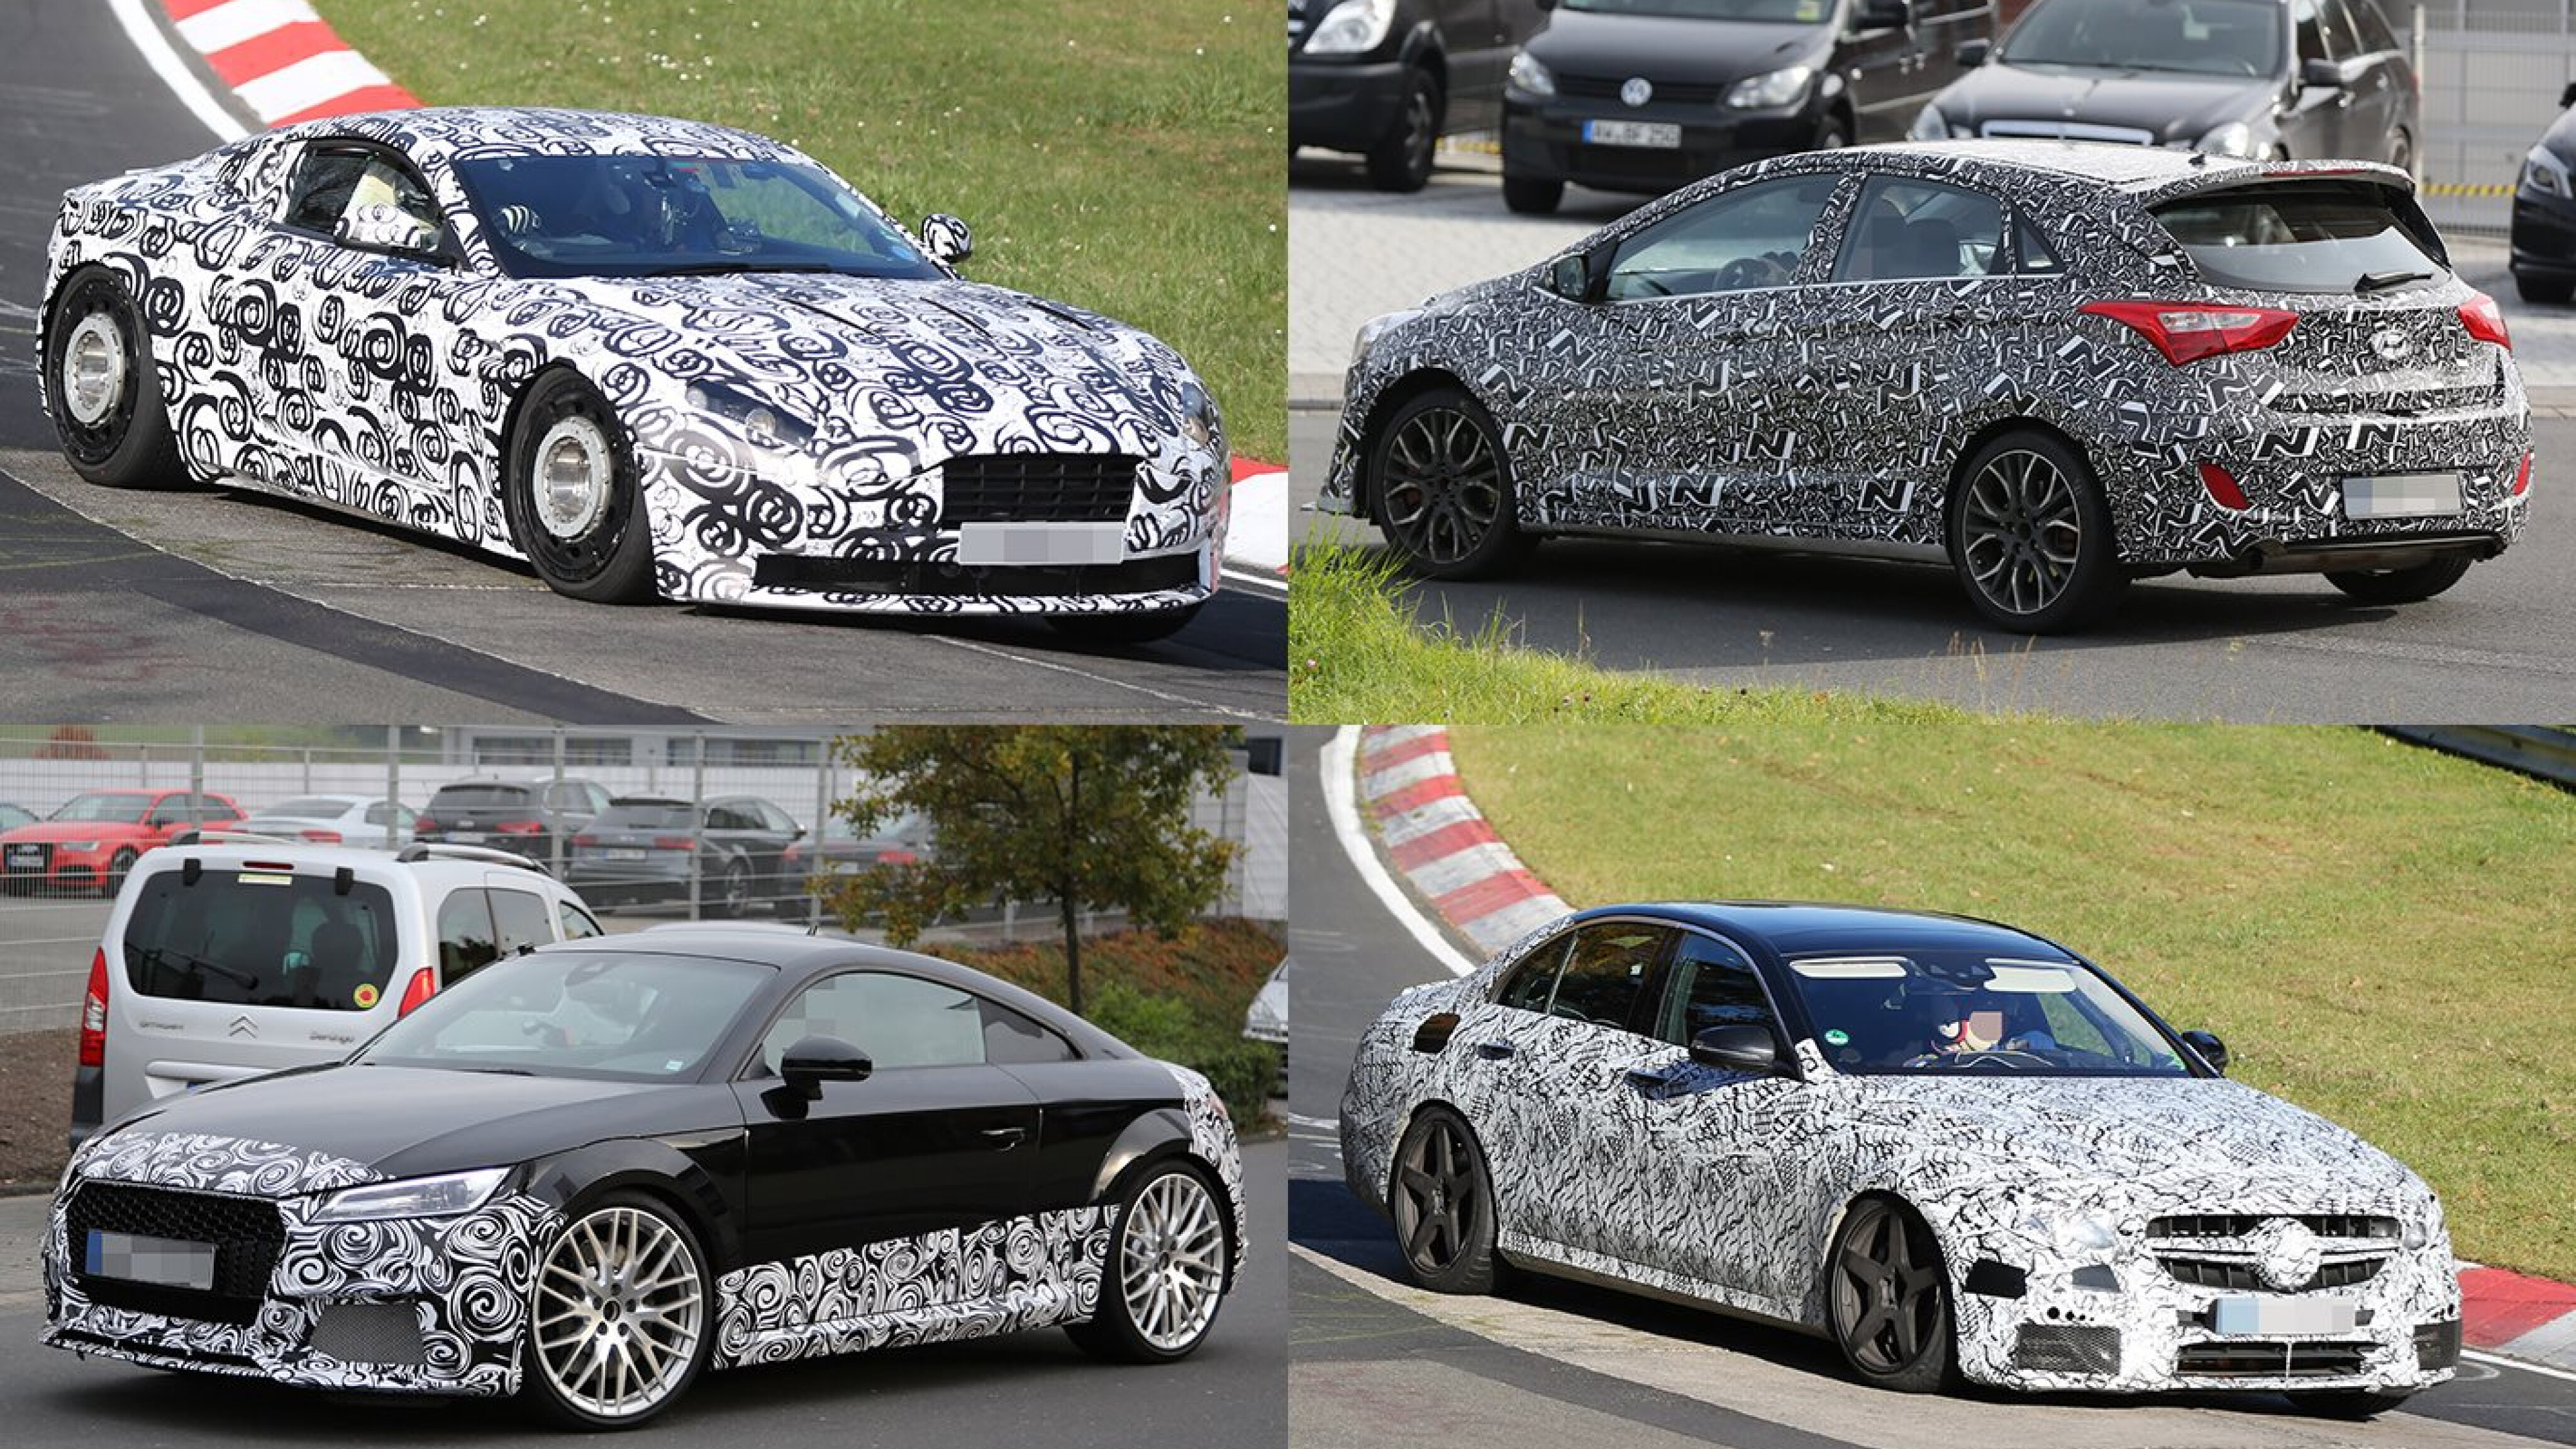 Next-Gen Audi TT RS Spied Winter Testing with Manual Transmission